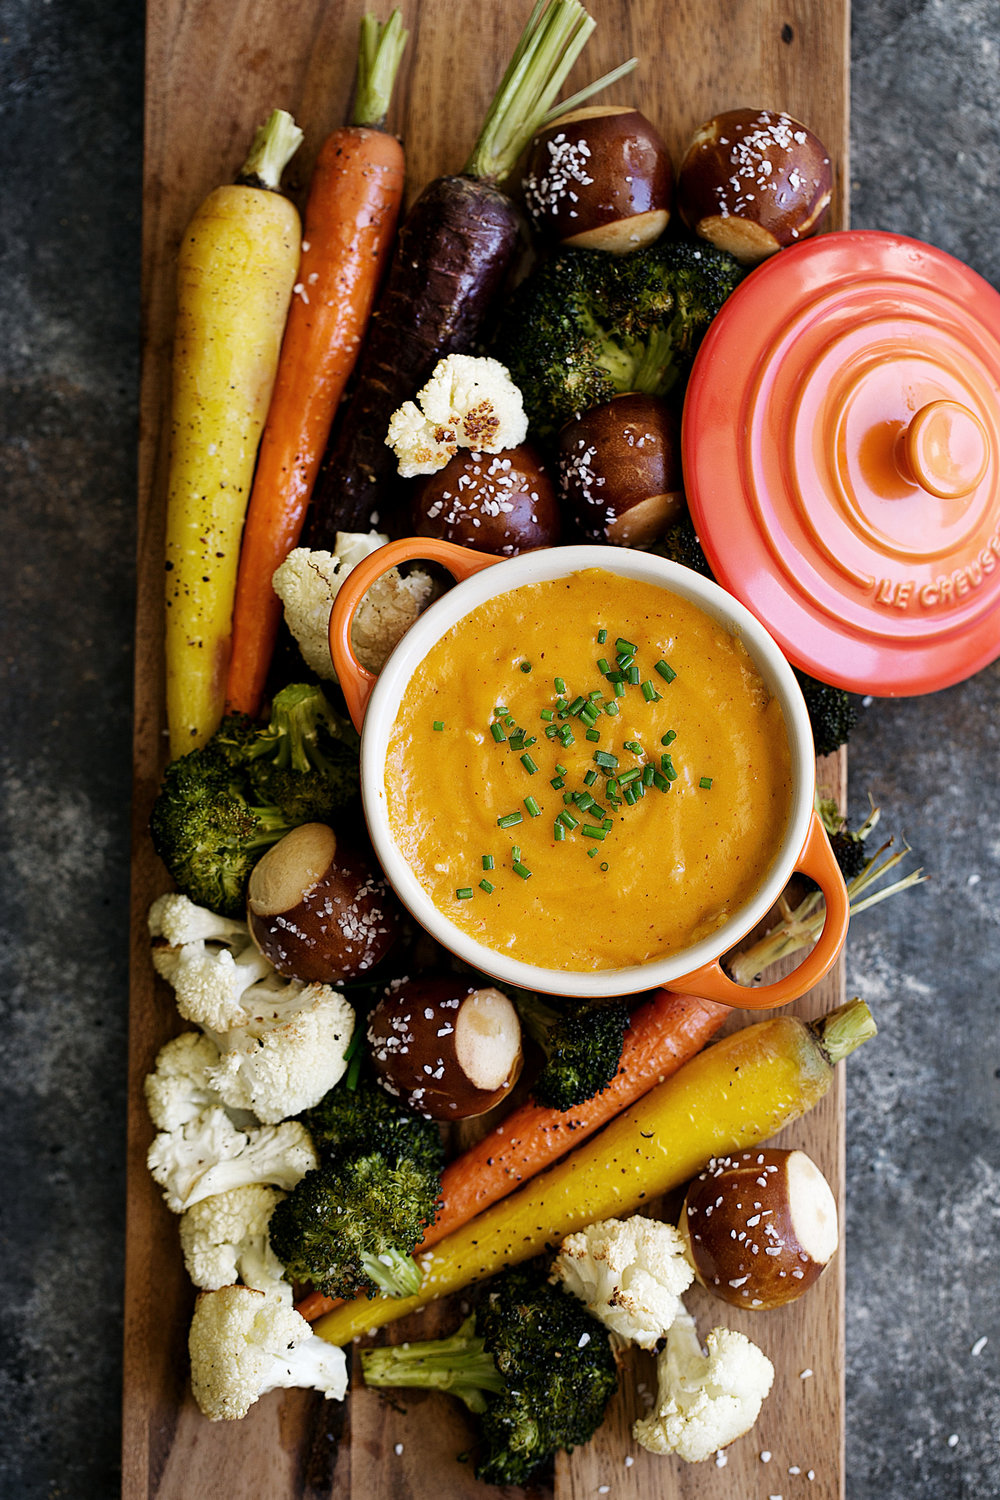 aged cheddar fondue with roasted vegetables